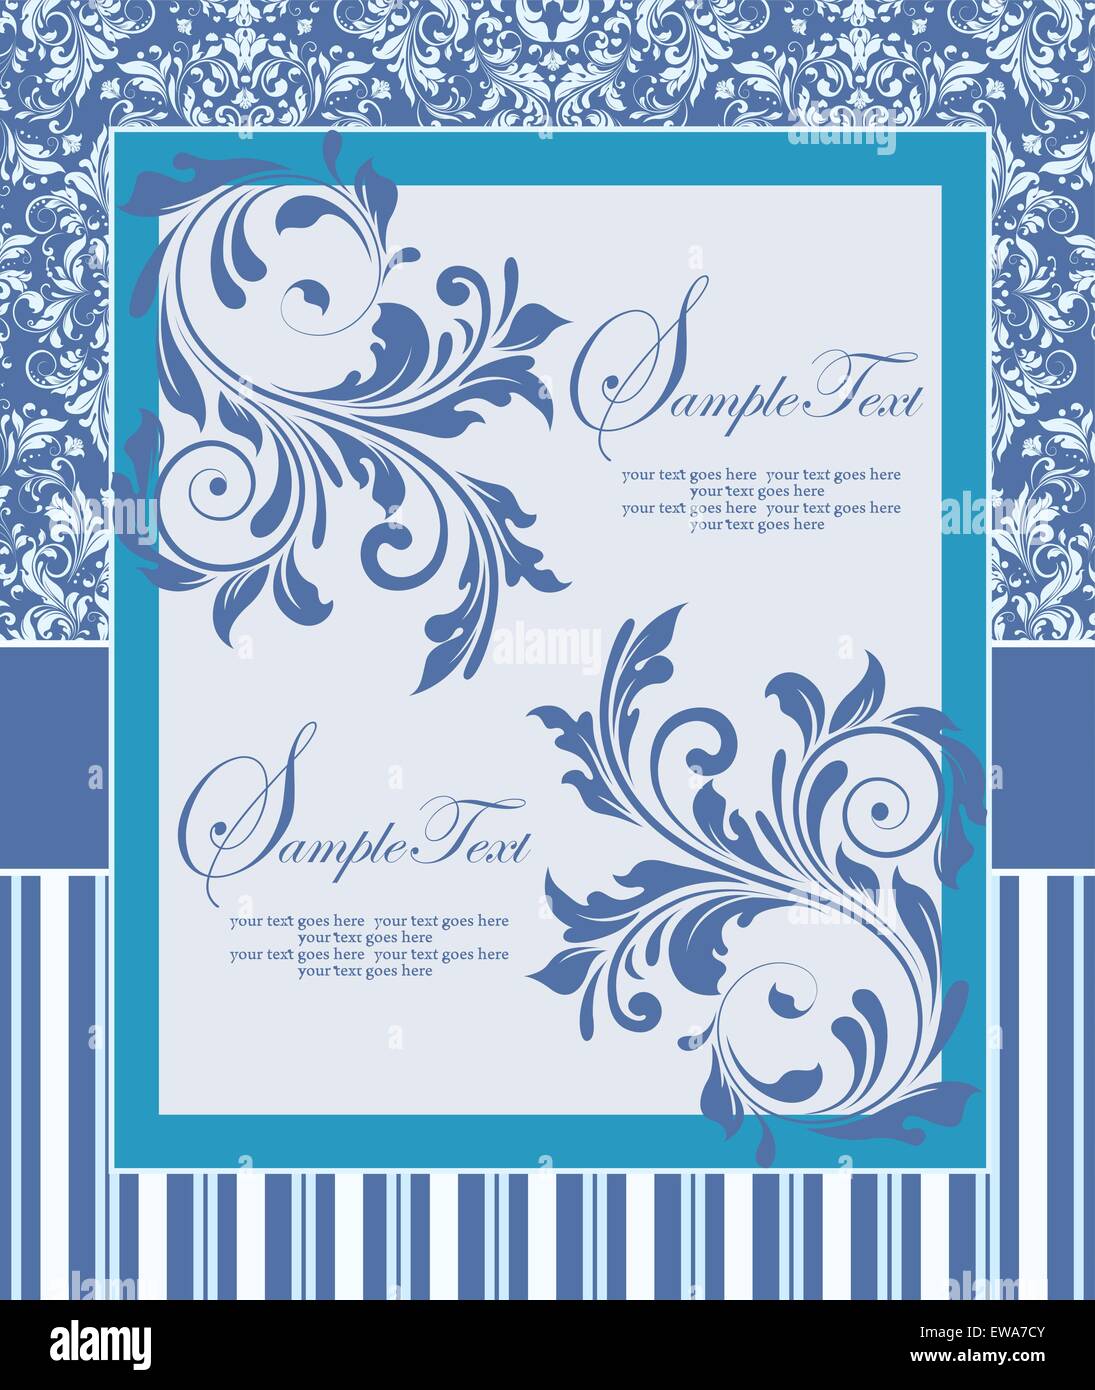 Vintage invitation card with ornate elegant retro abstract floral design, blue and white flowers and leaves with stripes Stock Vector